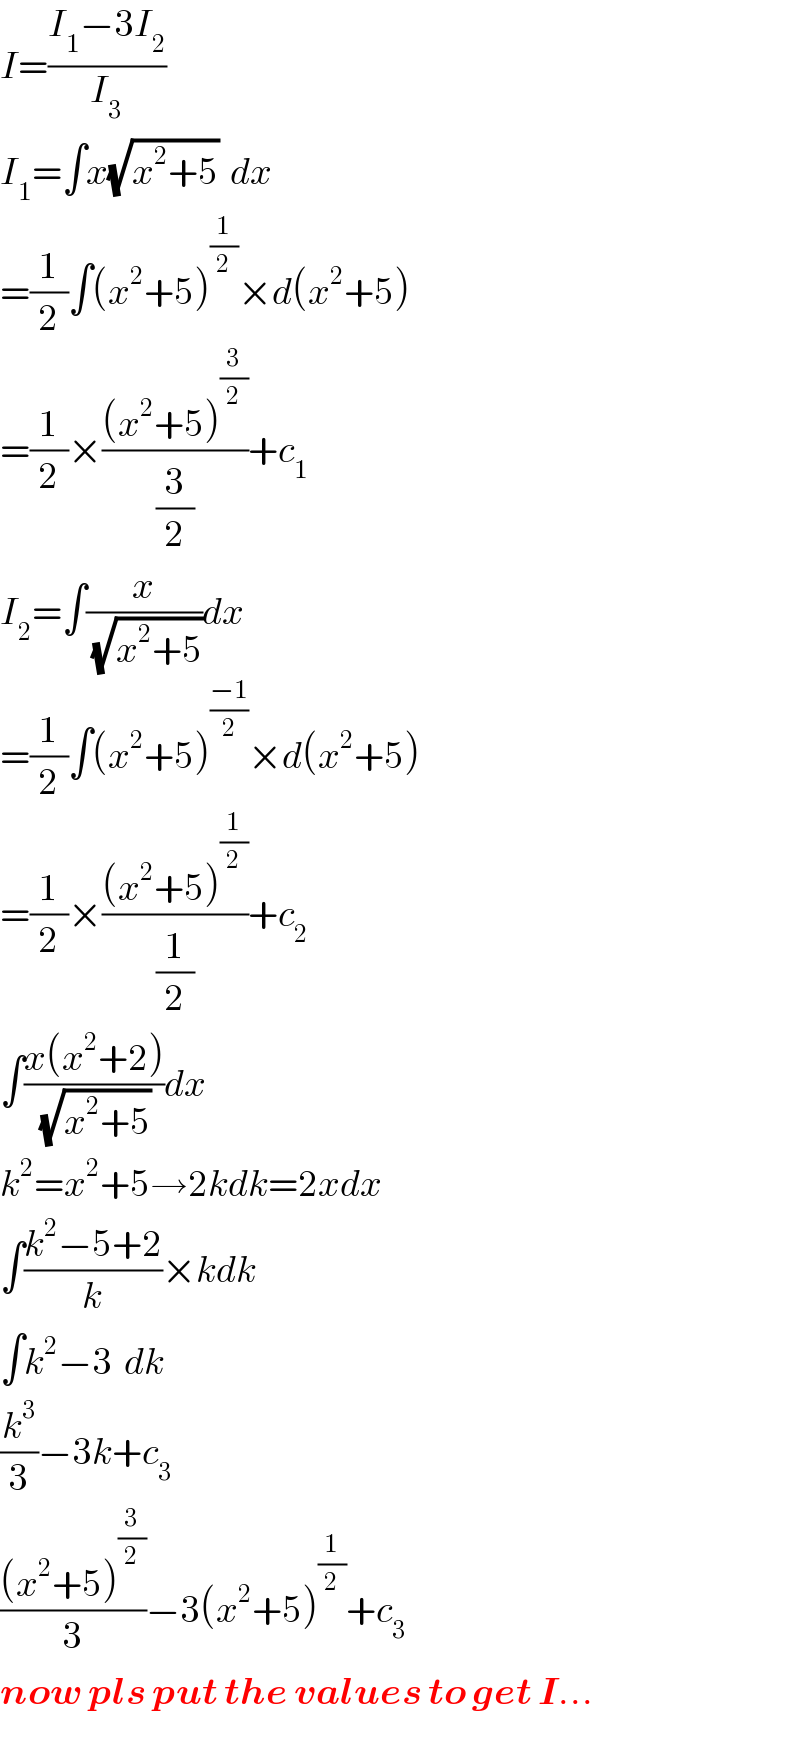 I=((I_1 −3I_2 )/I_3 )  I_1 =∫x(√(x^2 +5))  dx  =(1/2)∫(x^2 +5)^(1/2) ×d(x^2 +5)  =(1/2)×(((x^2 +5)^(3/2) )/(3/2))+c_1   I_2 =∫(x/(√(x^2 +5)))dx  =(1/2)∫(x^2 +5)^((−1)/2) ×d(x^2 +5)  =(1/2)×(((x^2 +5)^(1/2) )/(1/2))+c_2   ∫((x(x^2 +2))/(√(x^2 +5)))dx  k^2 =x^2 +5→2kdk=2xdx  ∫((k^2 −5+2)/k)×kdk  ∫k^2 −3  dk  (k^3 /3)−3k+c_3   (((x^2 +5)^(3/2) )/3)−3(x^2 +5)^(1/2) +c_3   now pls put the values to get I...  